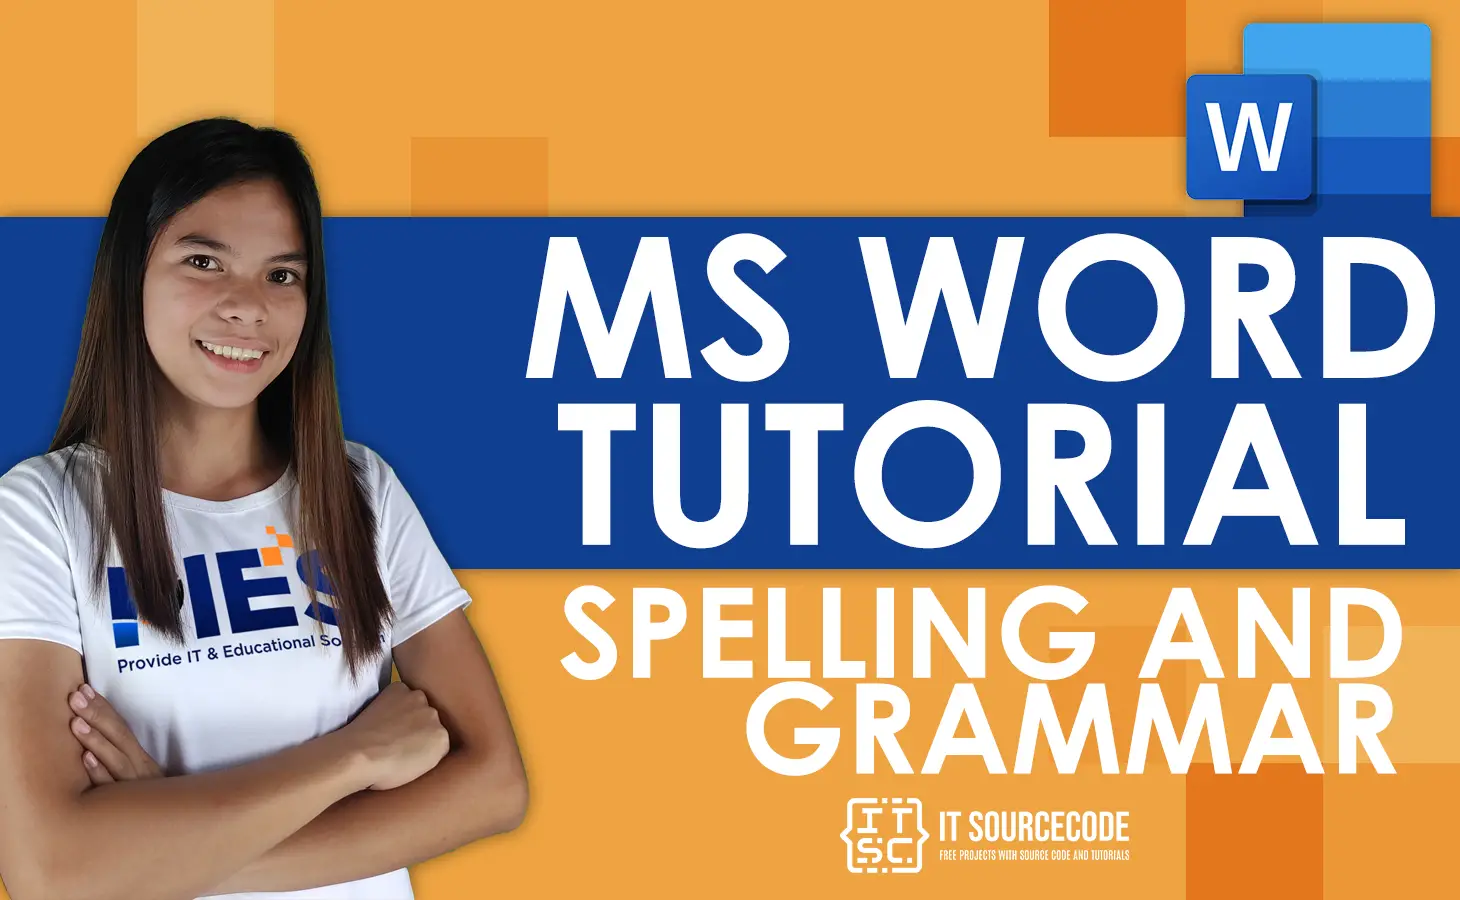 MS Word Tutorial SPELLING AND GRAMMAR CHECKER